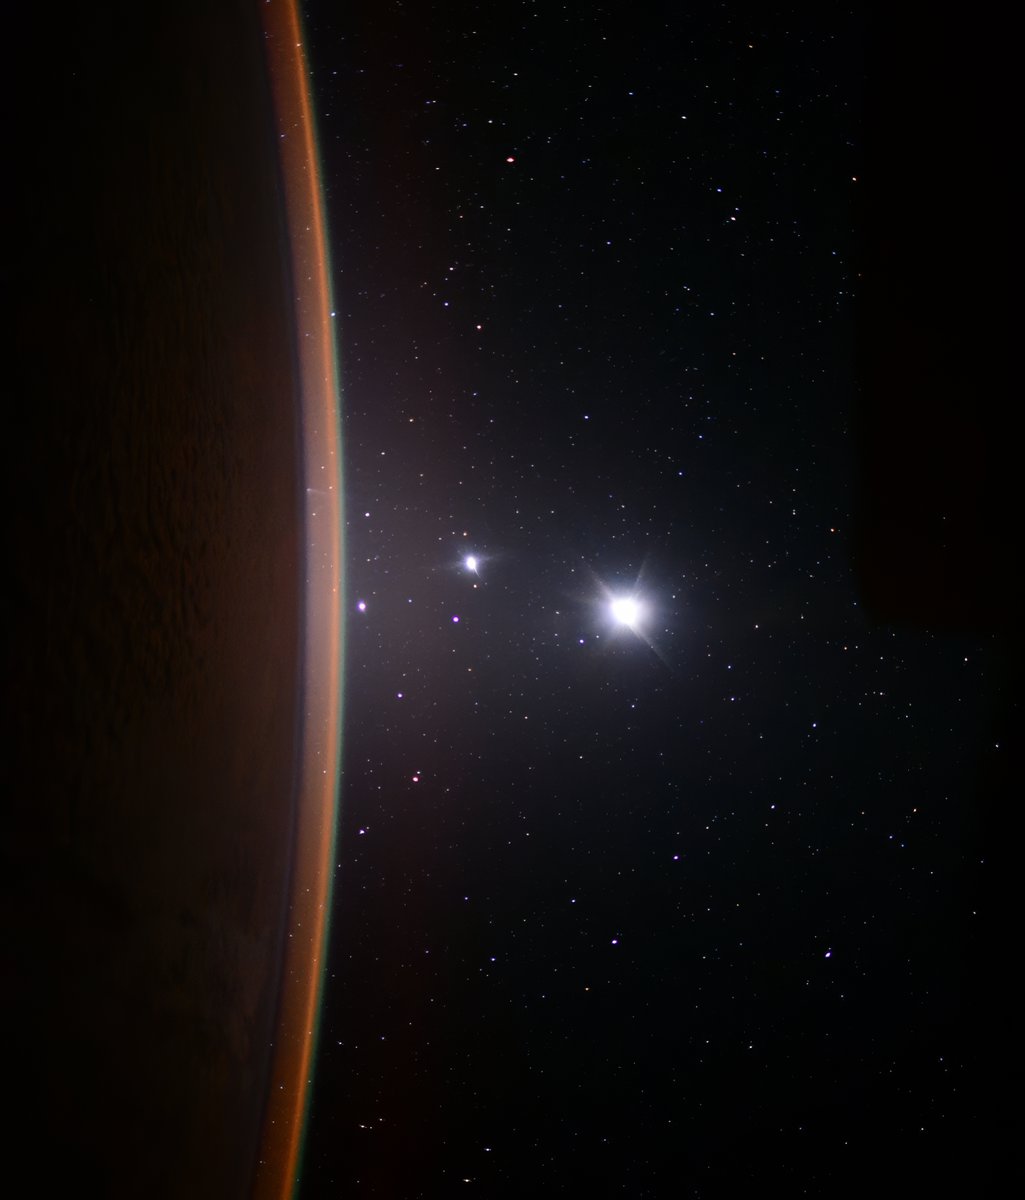 Earth-Moon-Venus-Jupiter alignment from the International Space Station.